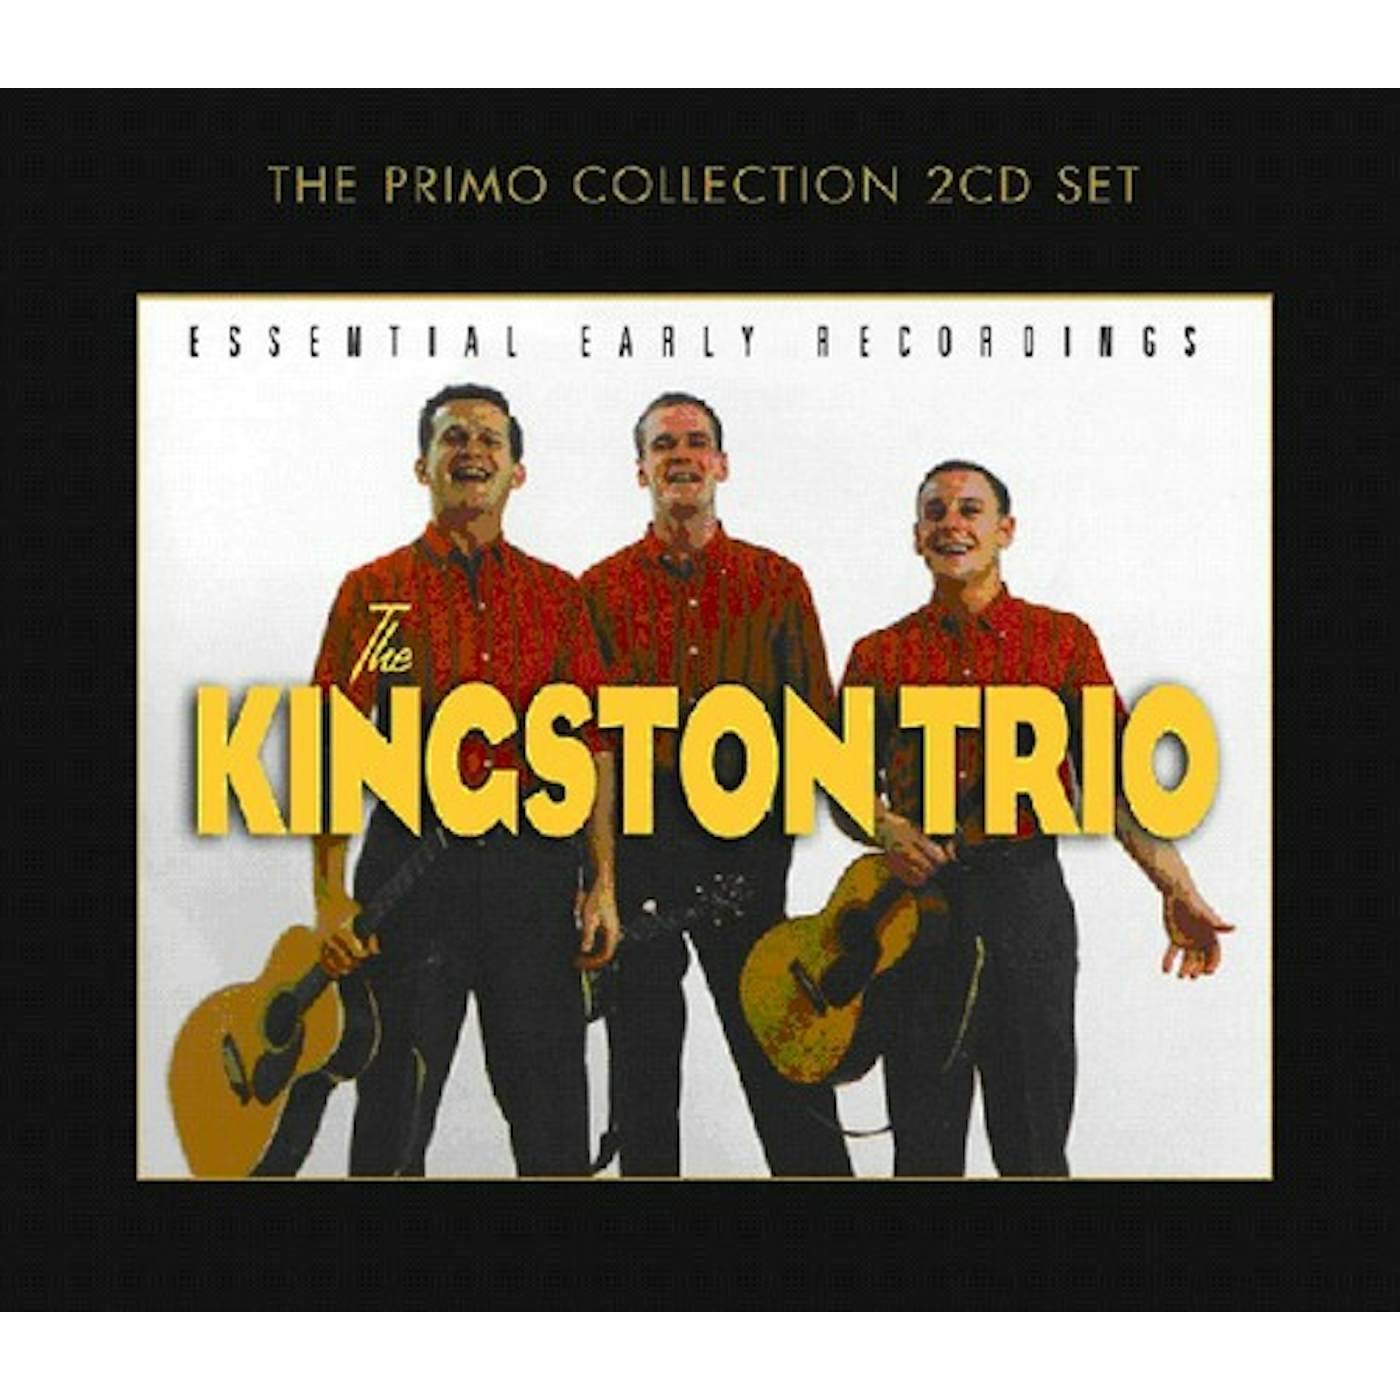 The Kingston Trio ESSENTIAL EARLY RECORDINGS CD